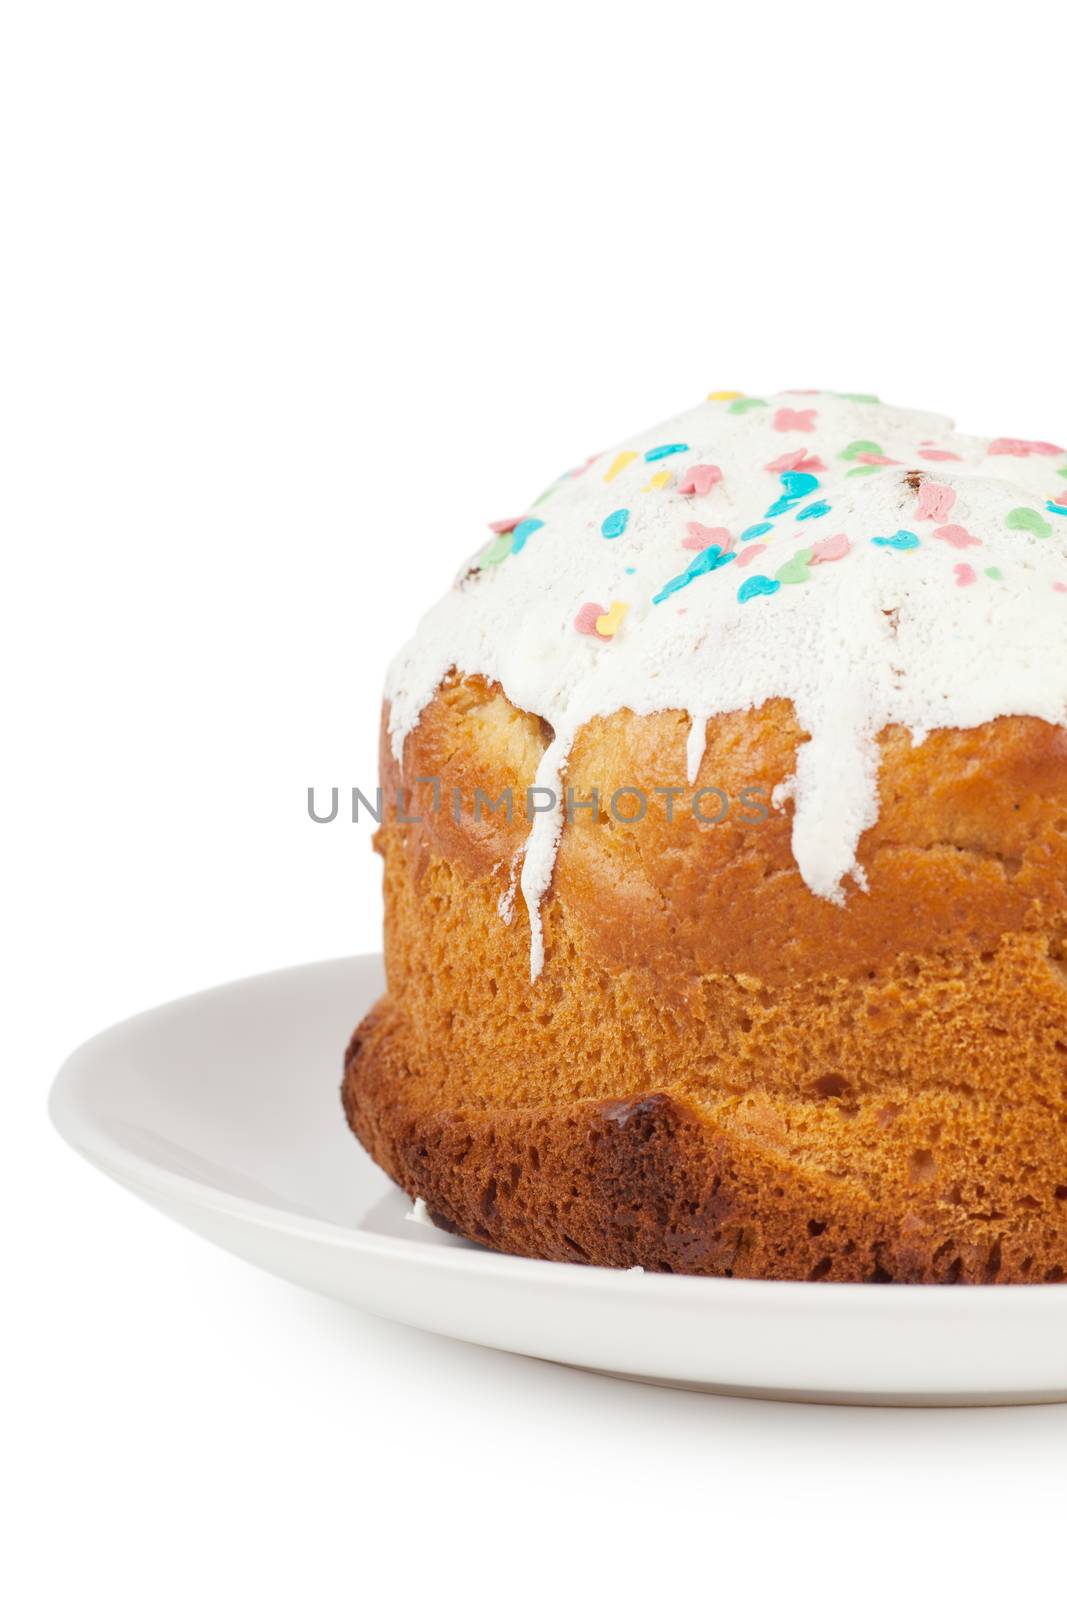 Closeup view of cake with icing on a plate over white background